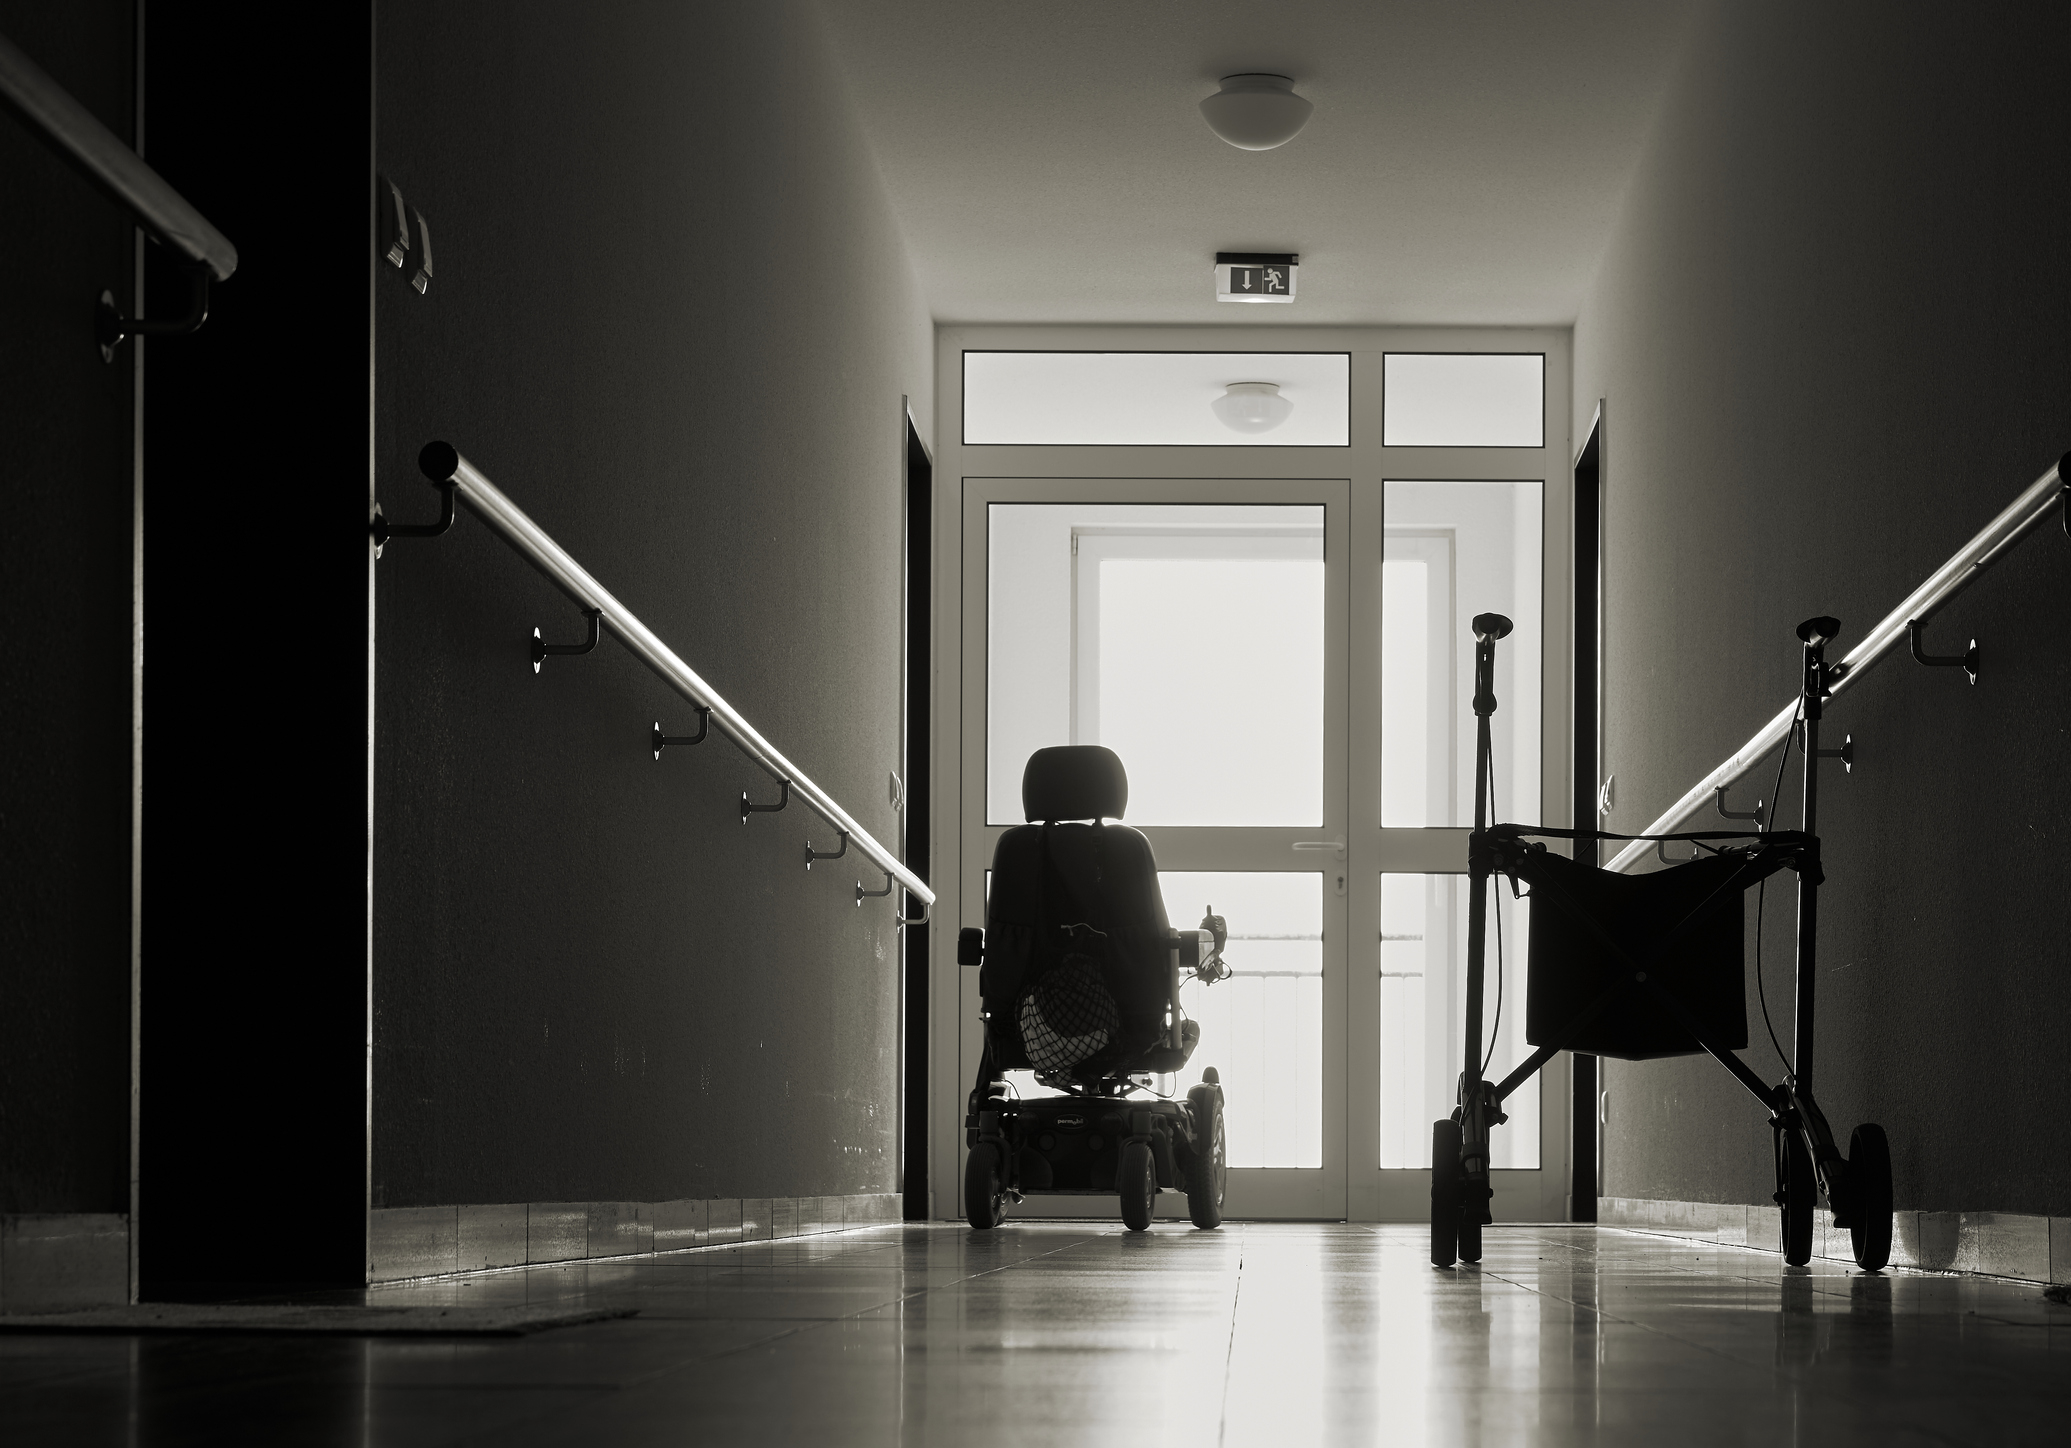 Person in a wheelchair at the end of a dimly lit hallway, facing a bright doorway, with a walker on the right side